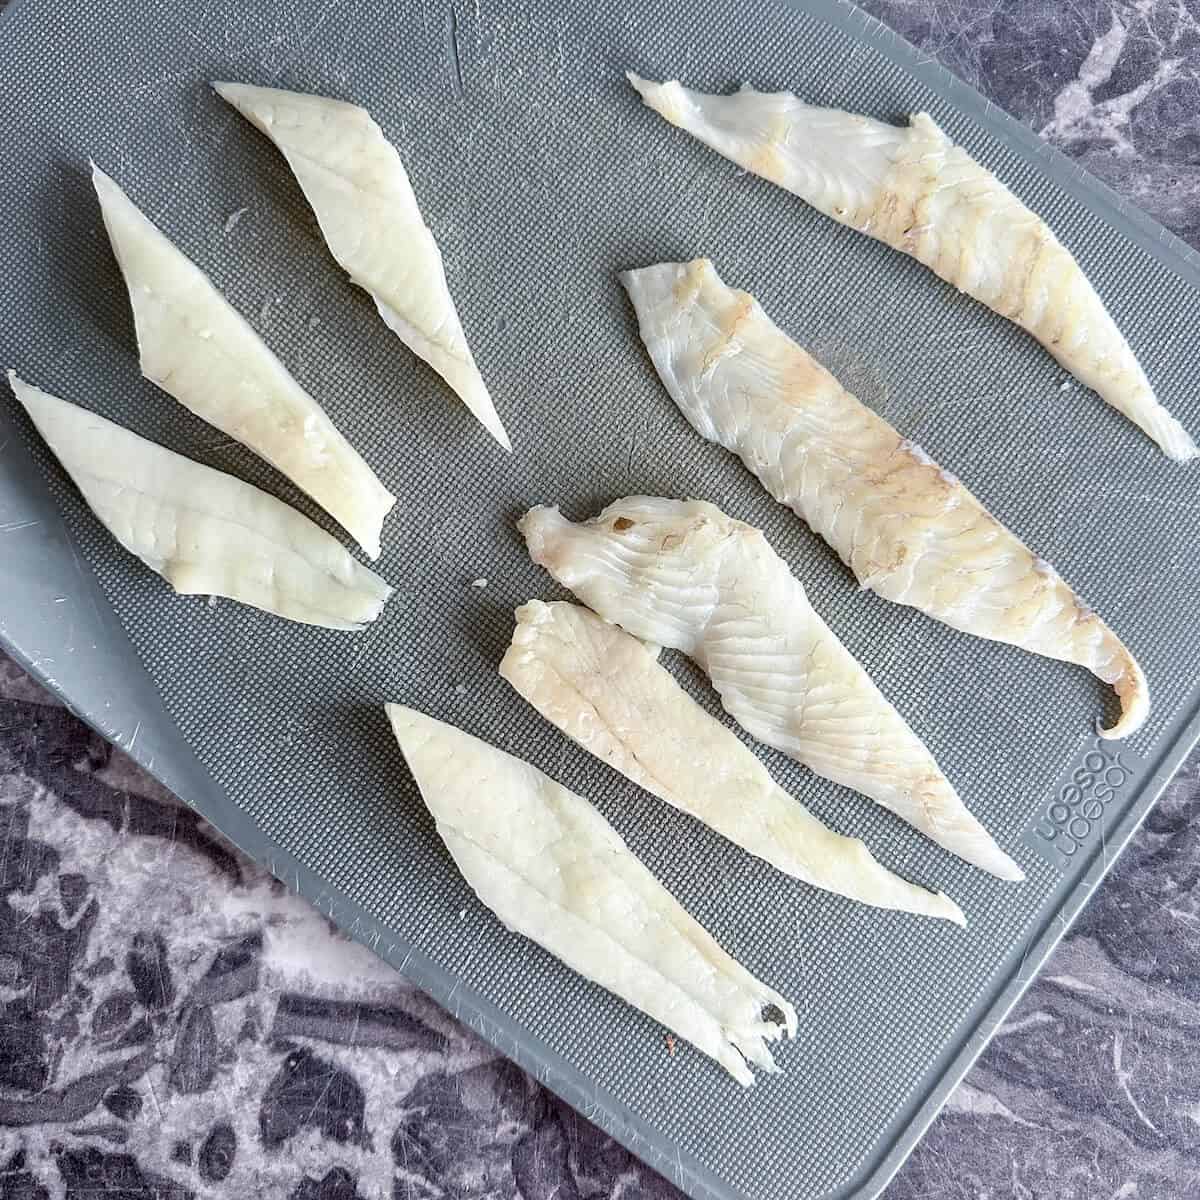 Fish fillets cut into strips, ready to panne and turn into fish goujons. 